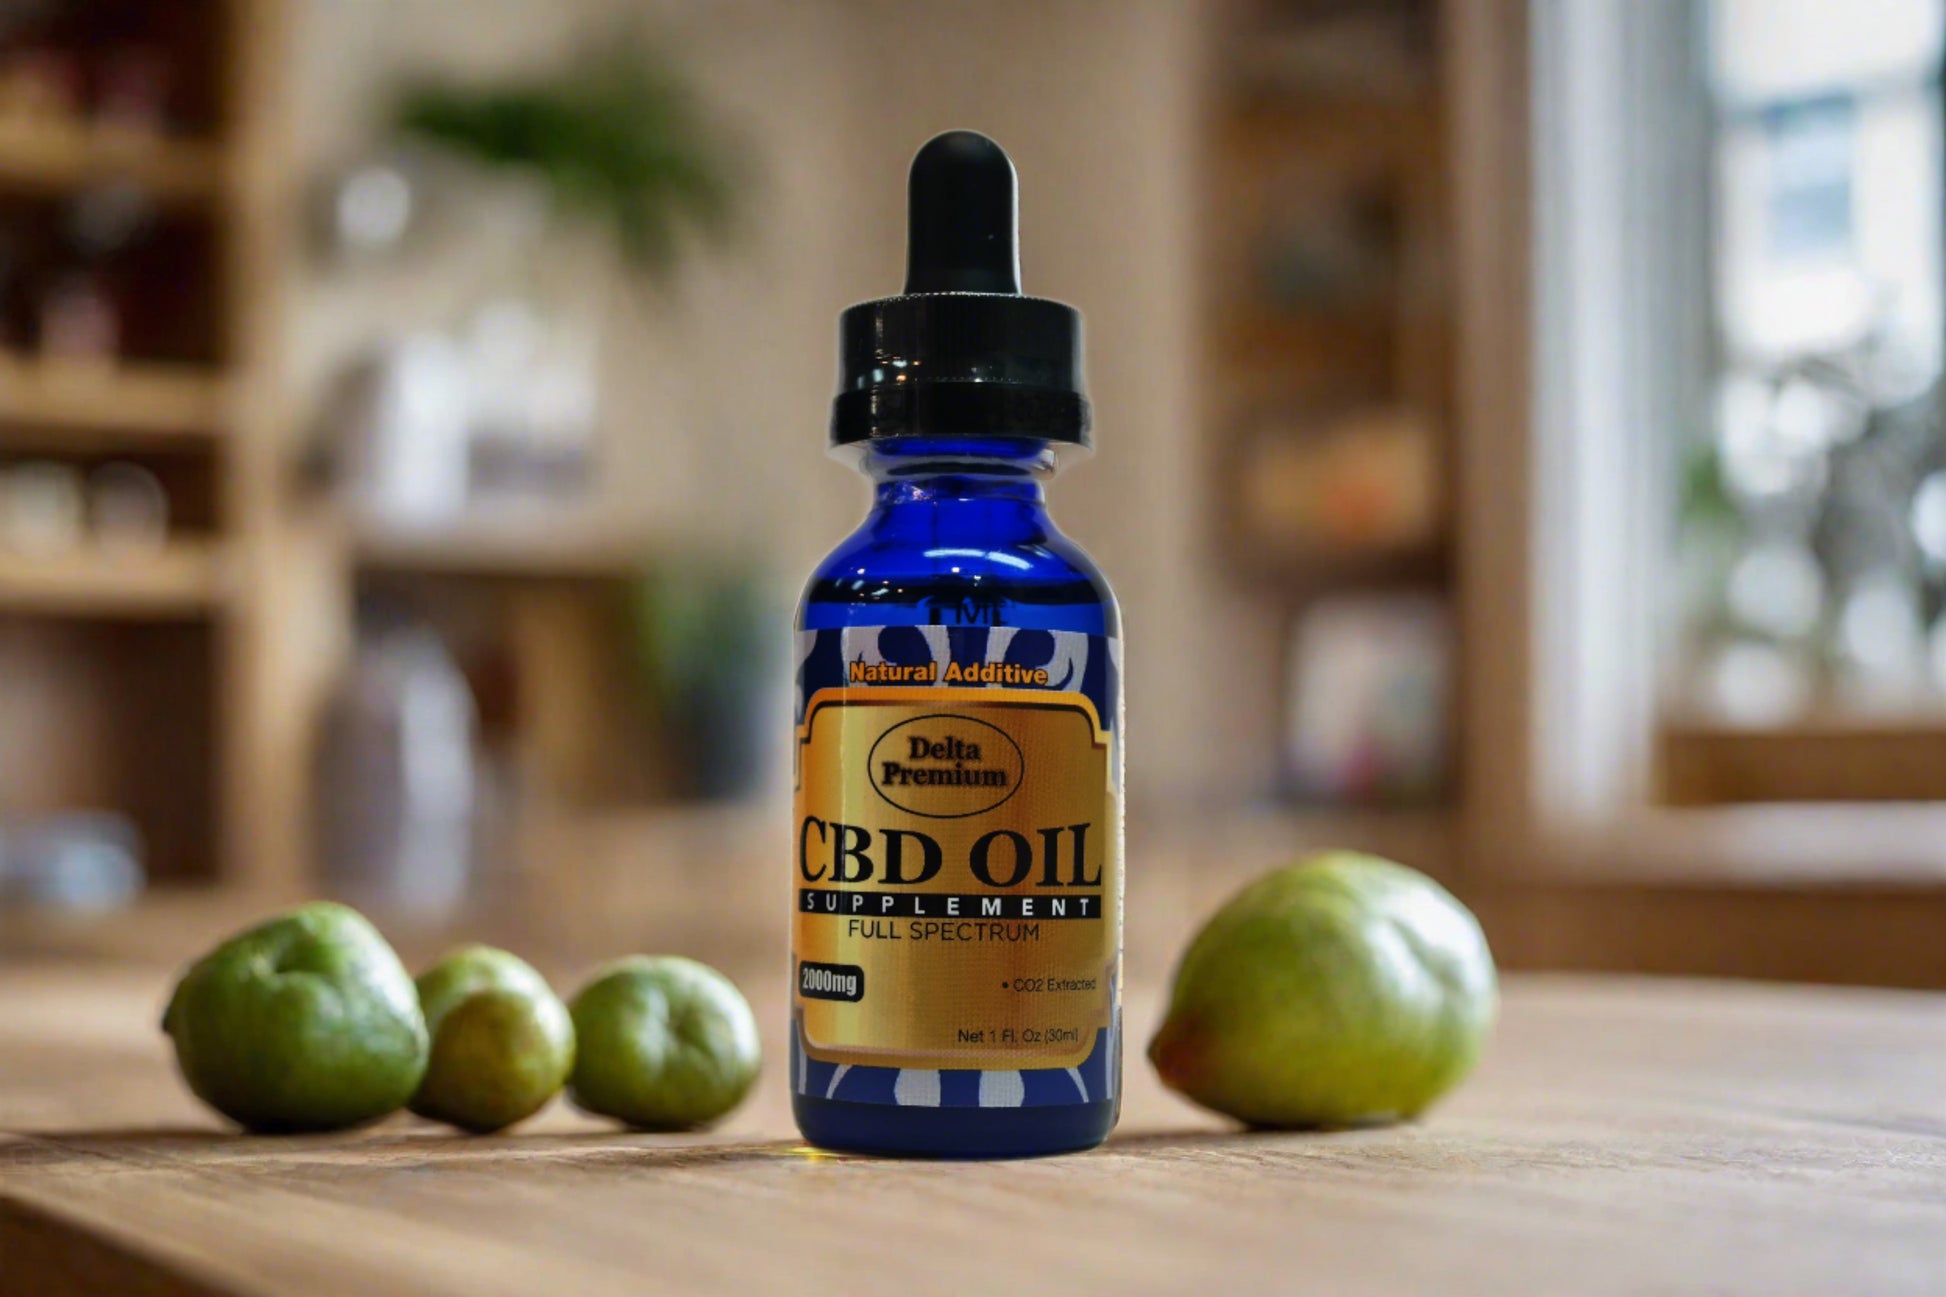 Delta Premium CBD 2000mg Tincture Oil with highest quality cannabinoids and NO THC. Tincture Oil is great for a variety of uses.